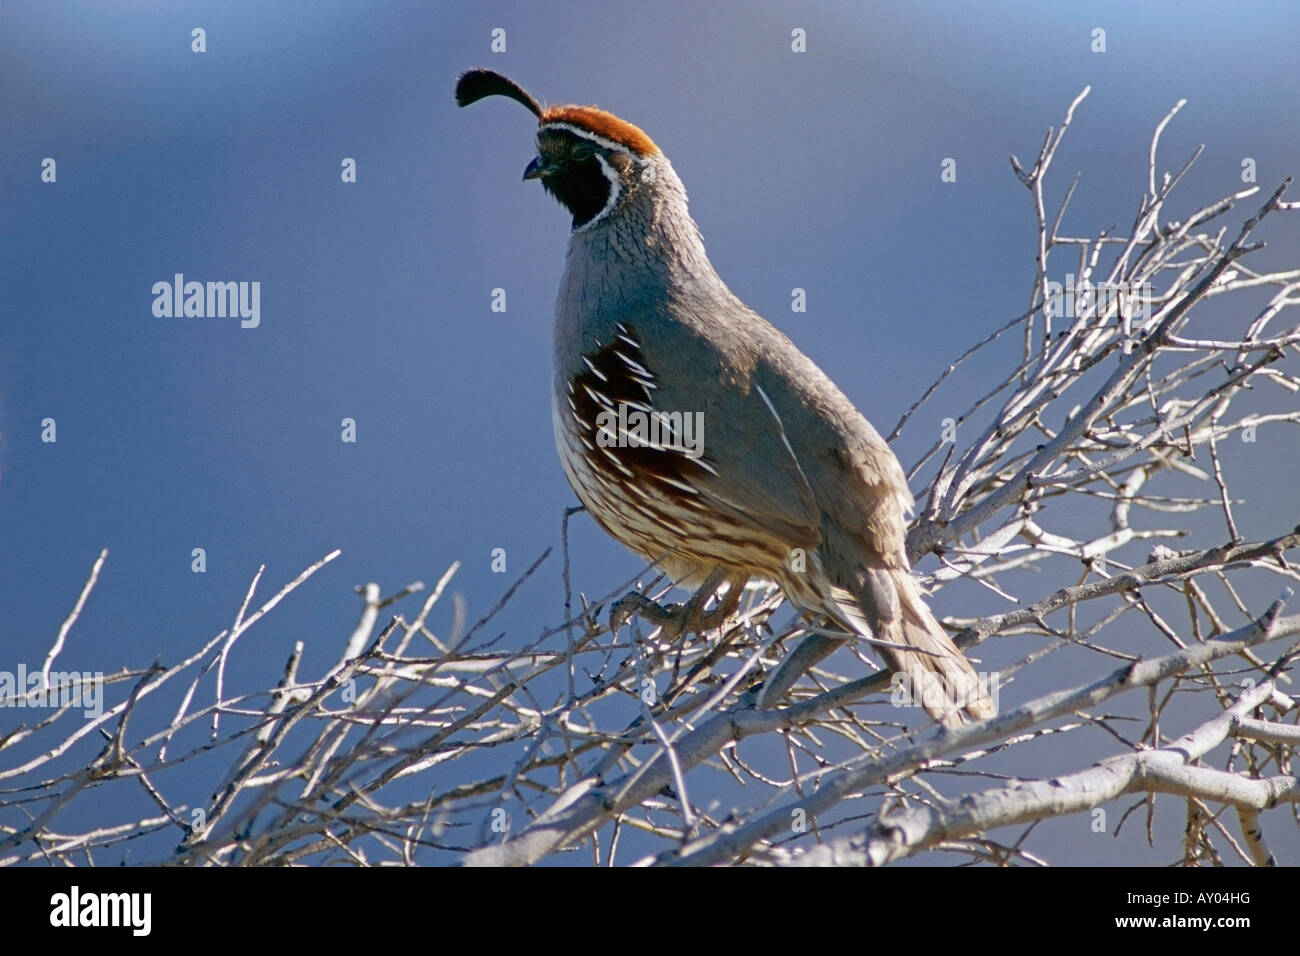 One male Gambel's Quail perched on a branch Tucson Arizona Stock Photo